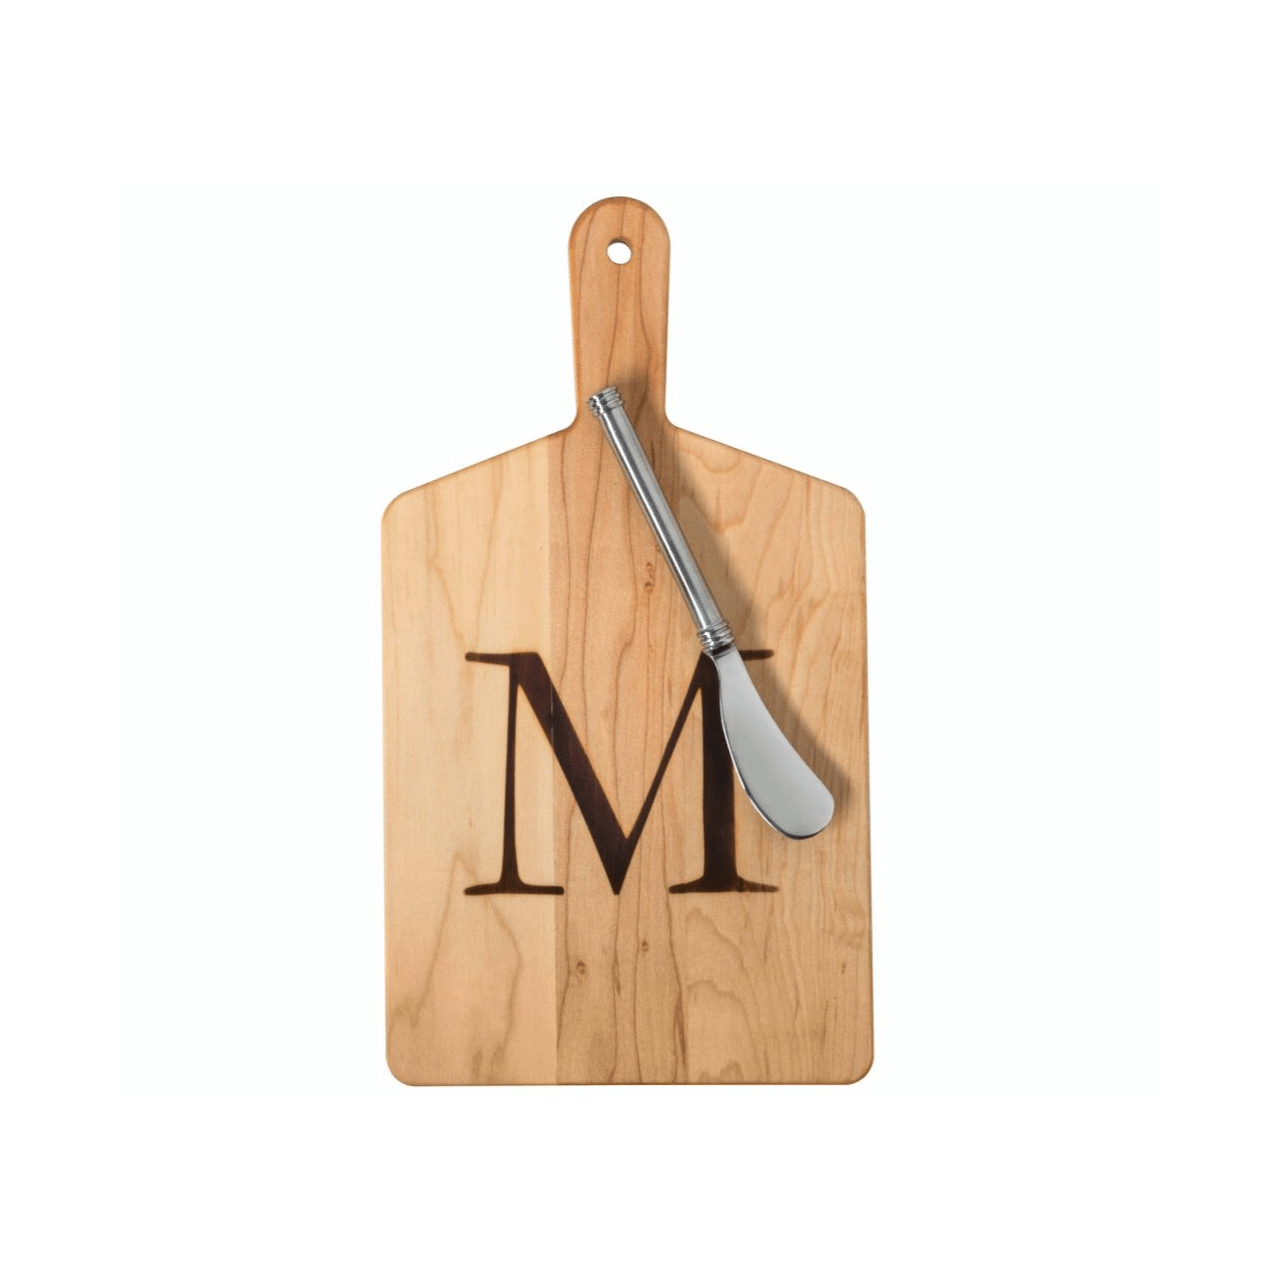 Maple Cheese Board with a Stamped R and Metal Spreader